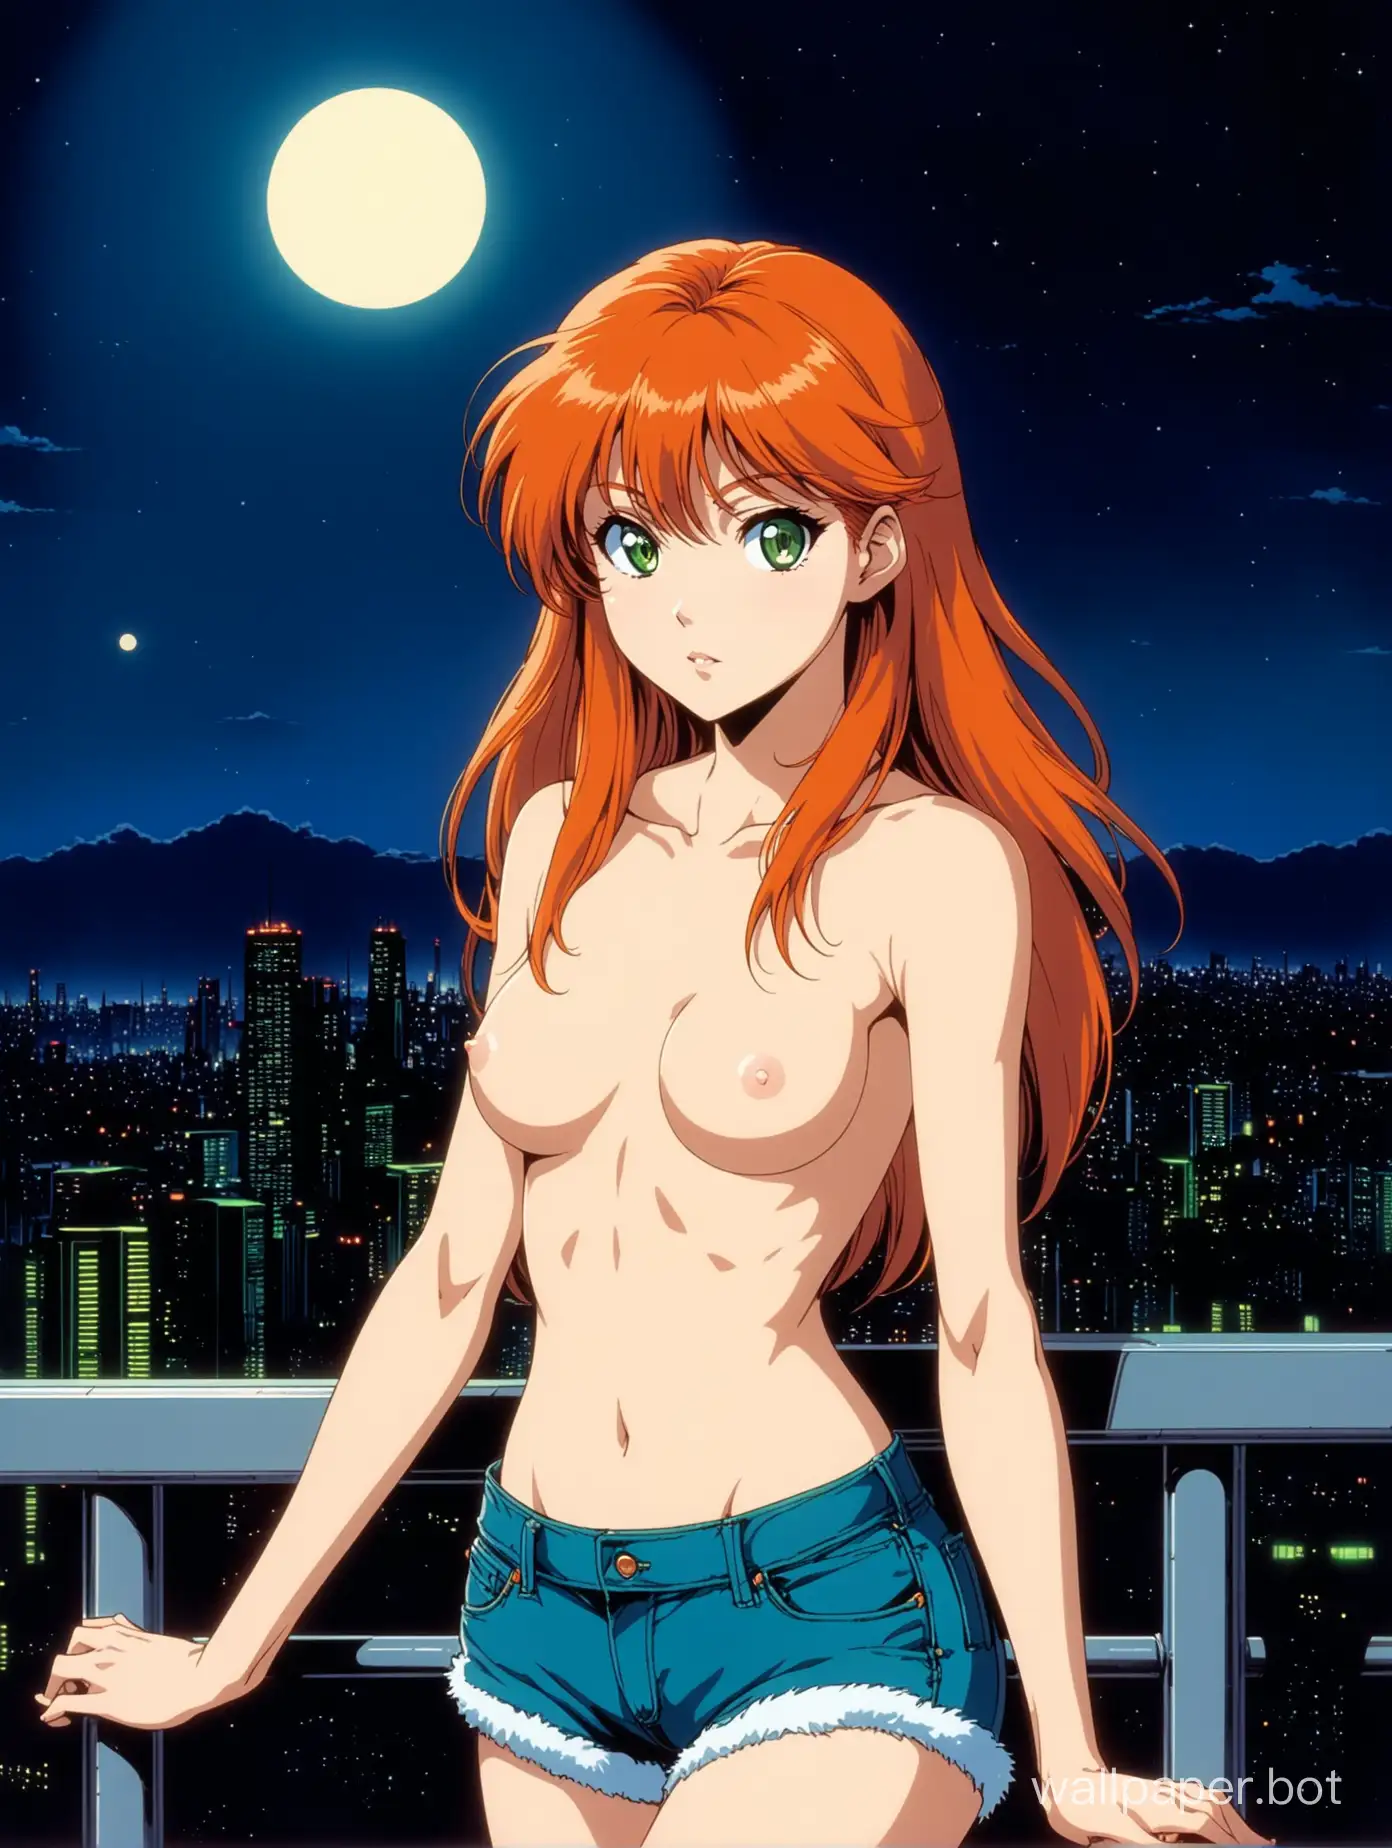 A 30 year old attractive topless redhead woman leaning against a railing, topless, skinny, in the style of 1990s sci fi anime, big green eyes, thin waist, wearing low-cut denim shorts, big fluffy orange hair, cityscape background, vintage anime, night, moonlit, matte